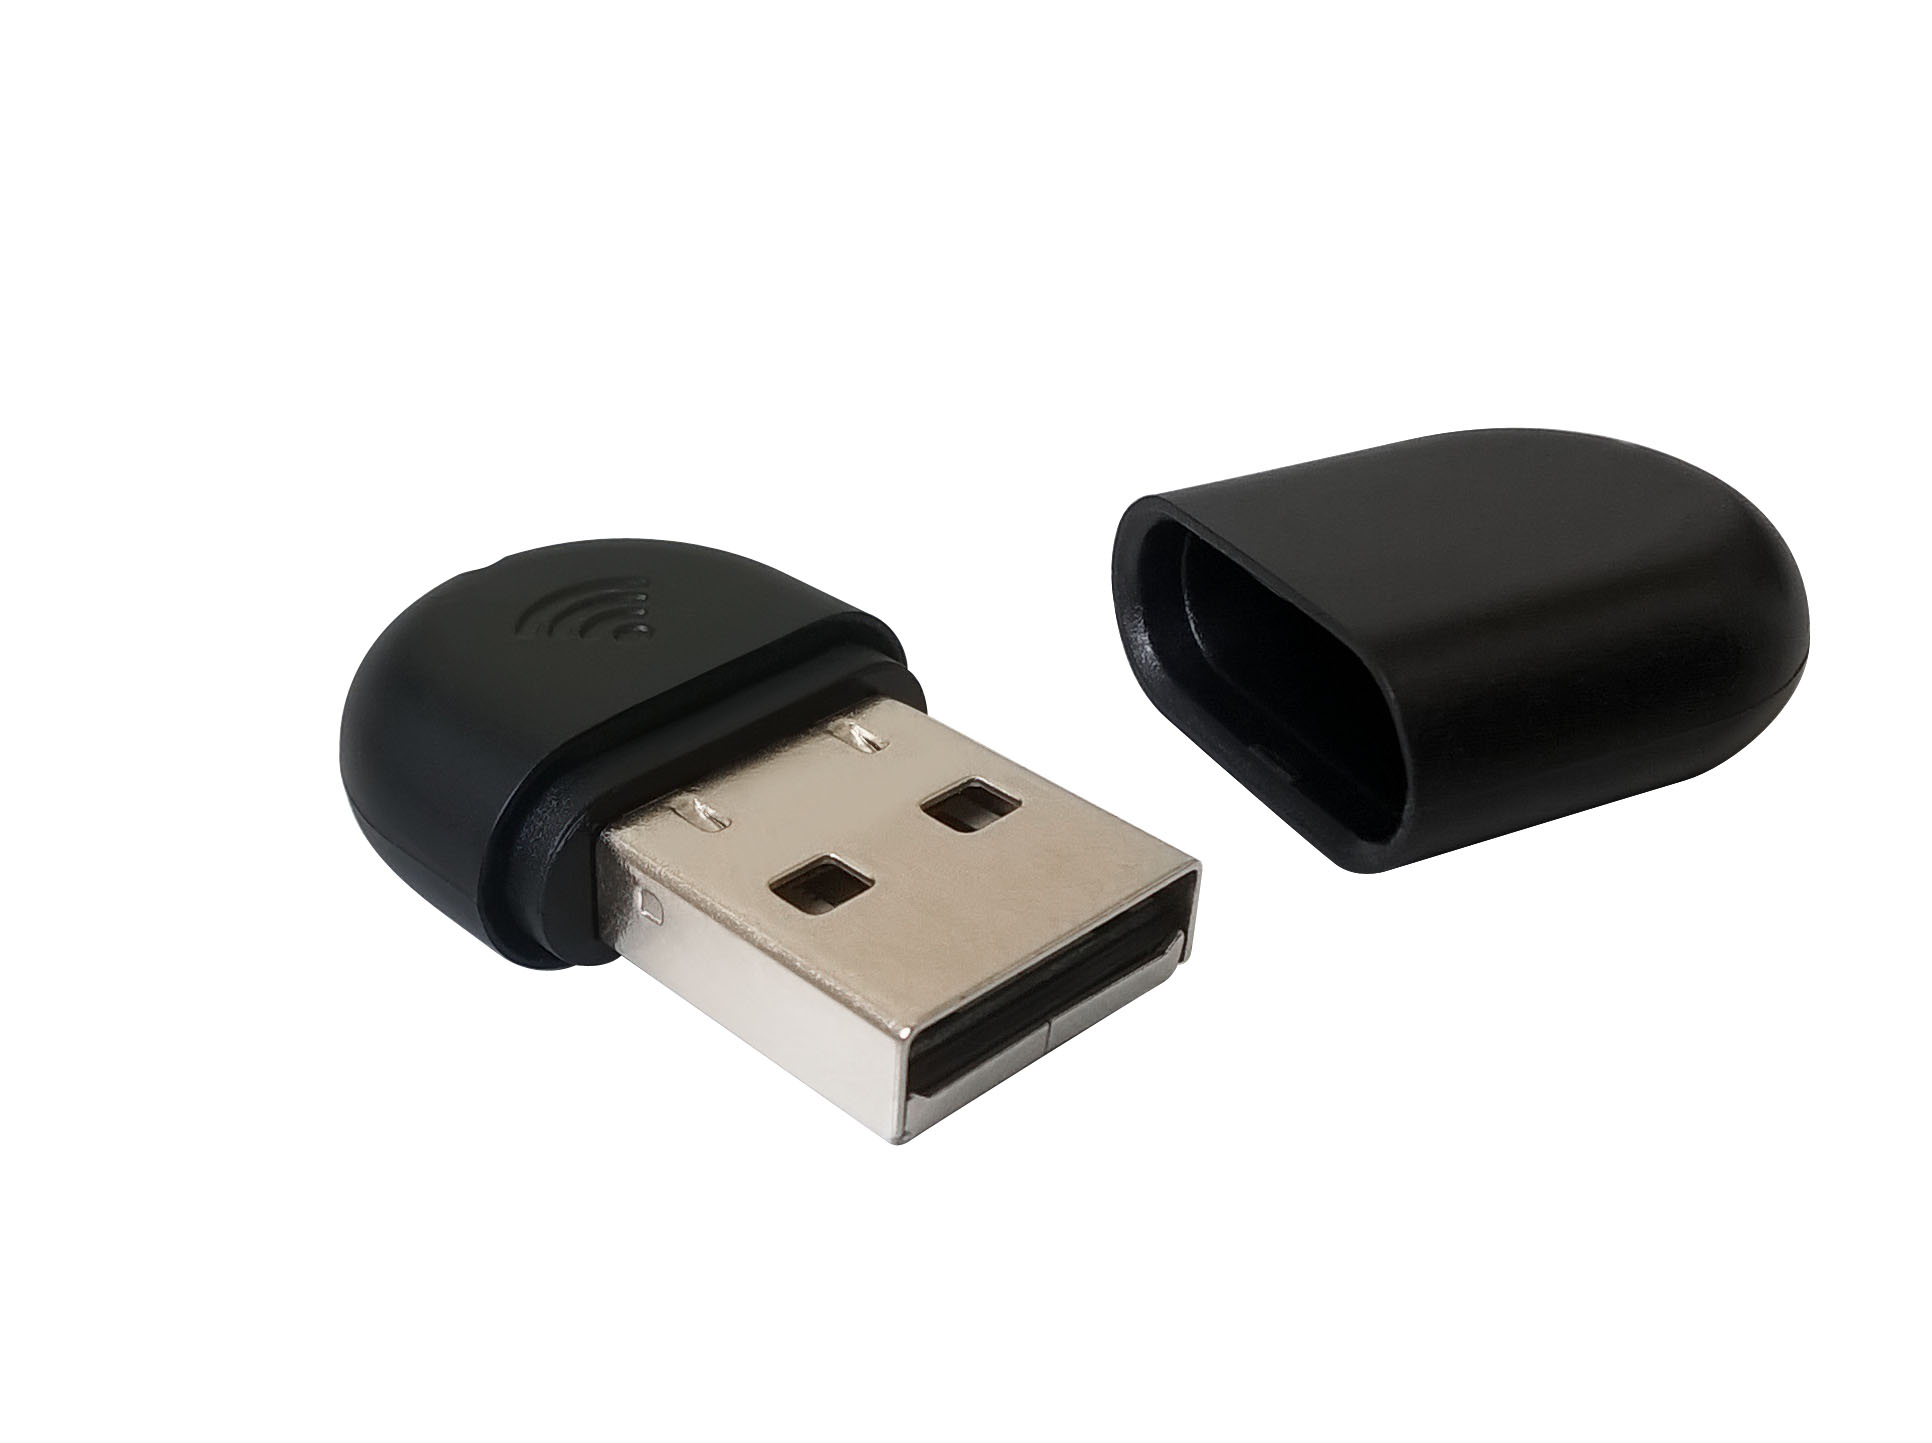 Yealink WF40 USB Wi-Fi dongle pro SIP-T29G/T46G/T48G/T46S/T48S 320A163